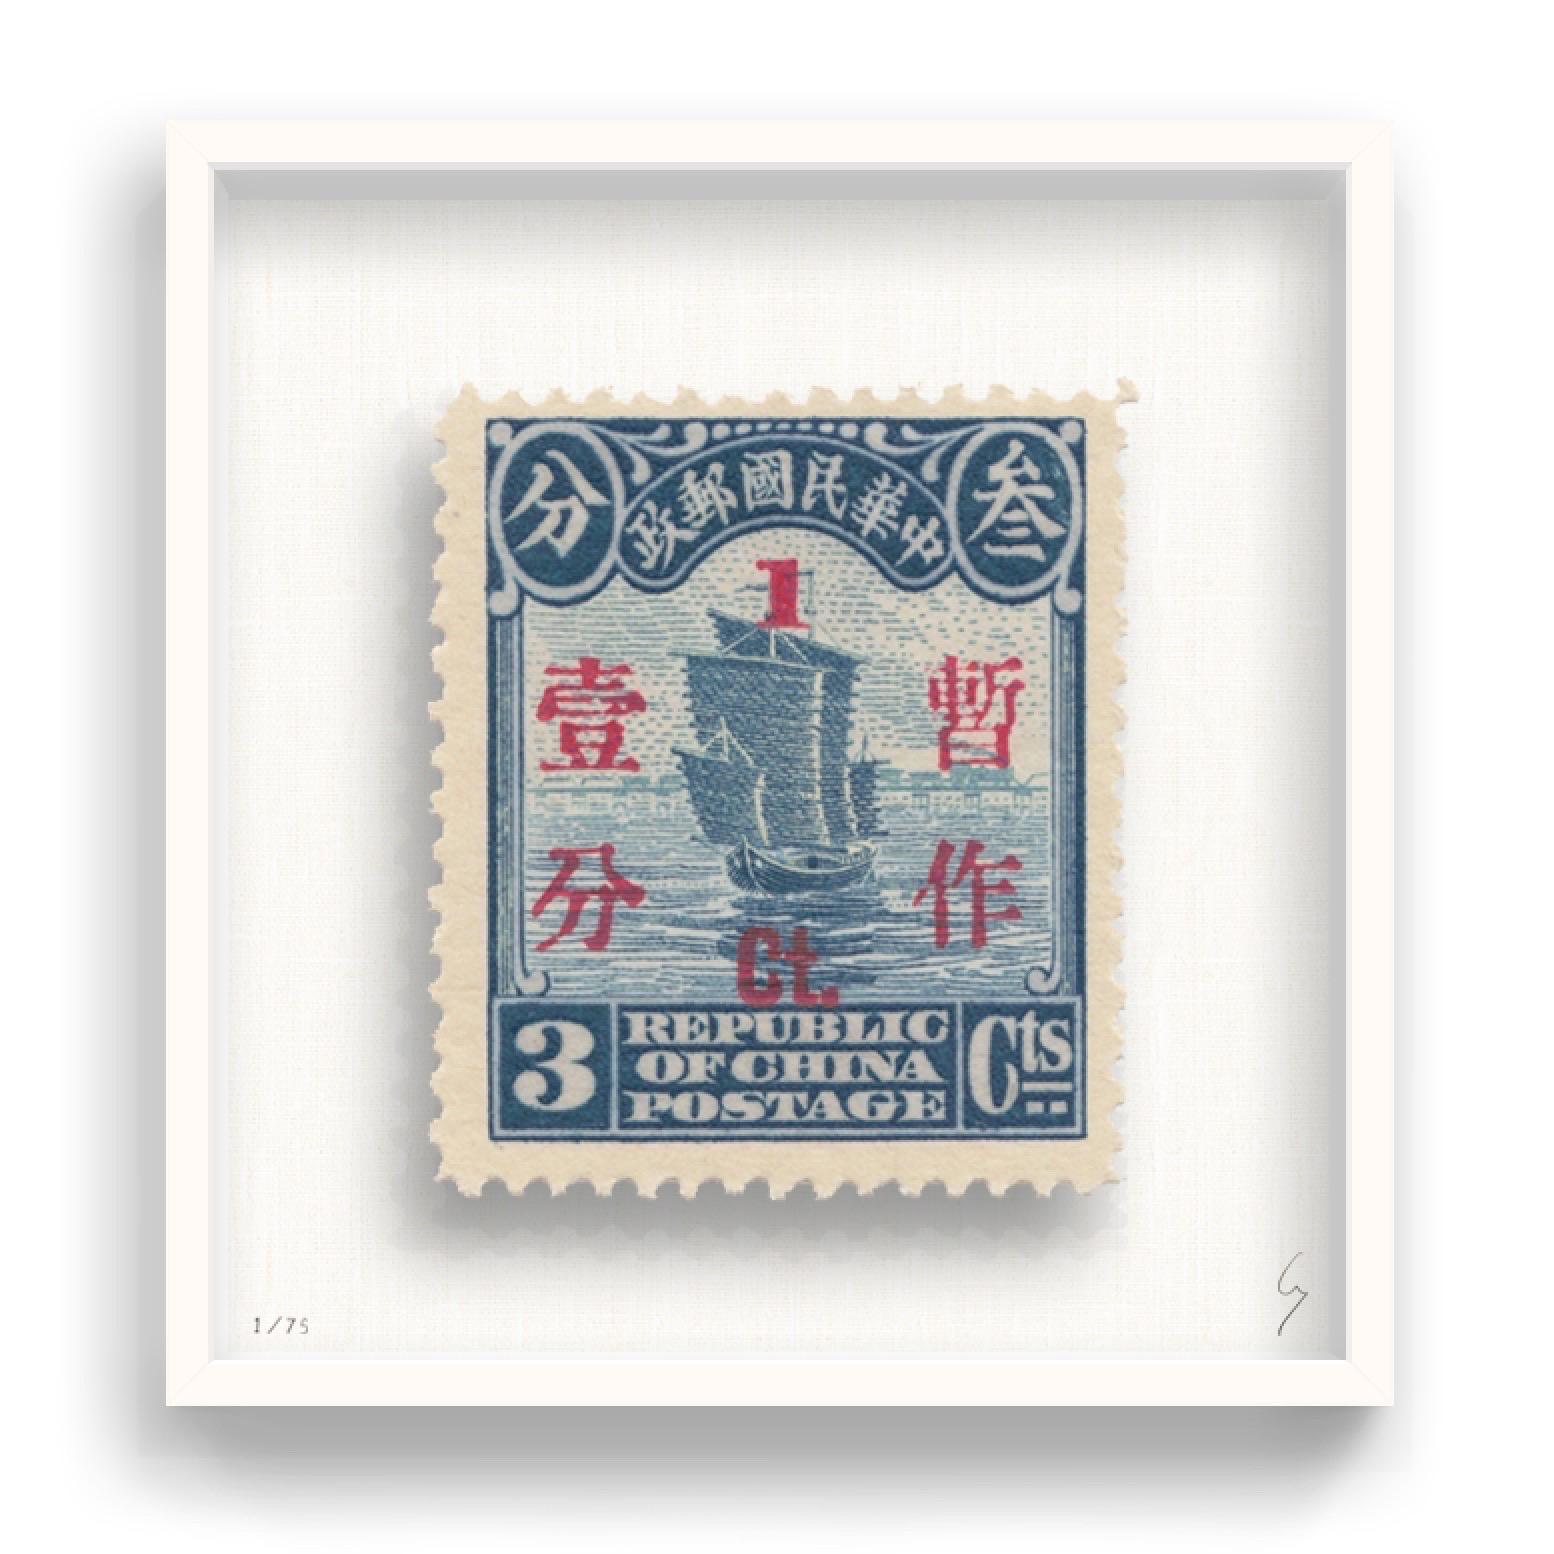 Guy Gee, China (medium)

Hand-engraved print on 350gsm on G.F Smith card
53 x 56cm (20 4/5 x 22 2/5 in)
Frame included 
Edition of 75 

Each artwork by Guy had been digitally reimagined from an original postage stamp. Cut out and finished by hand,